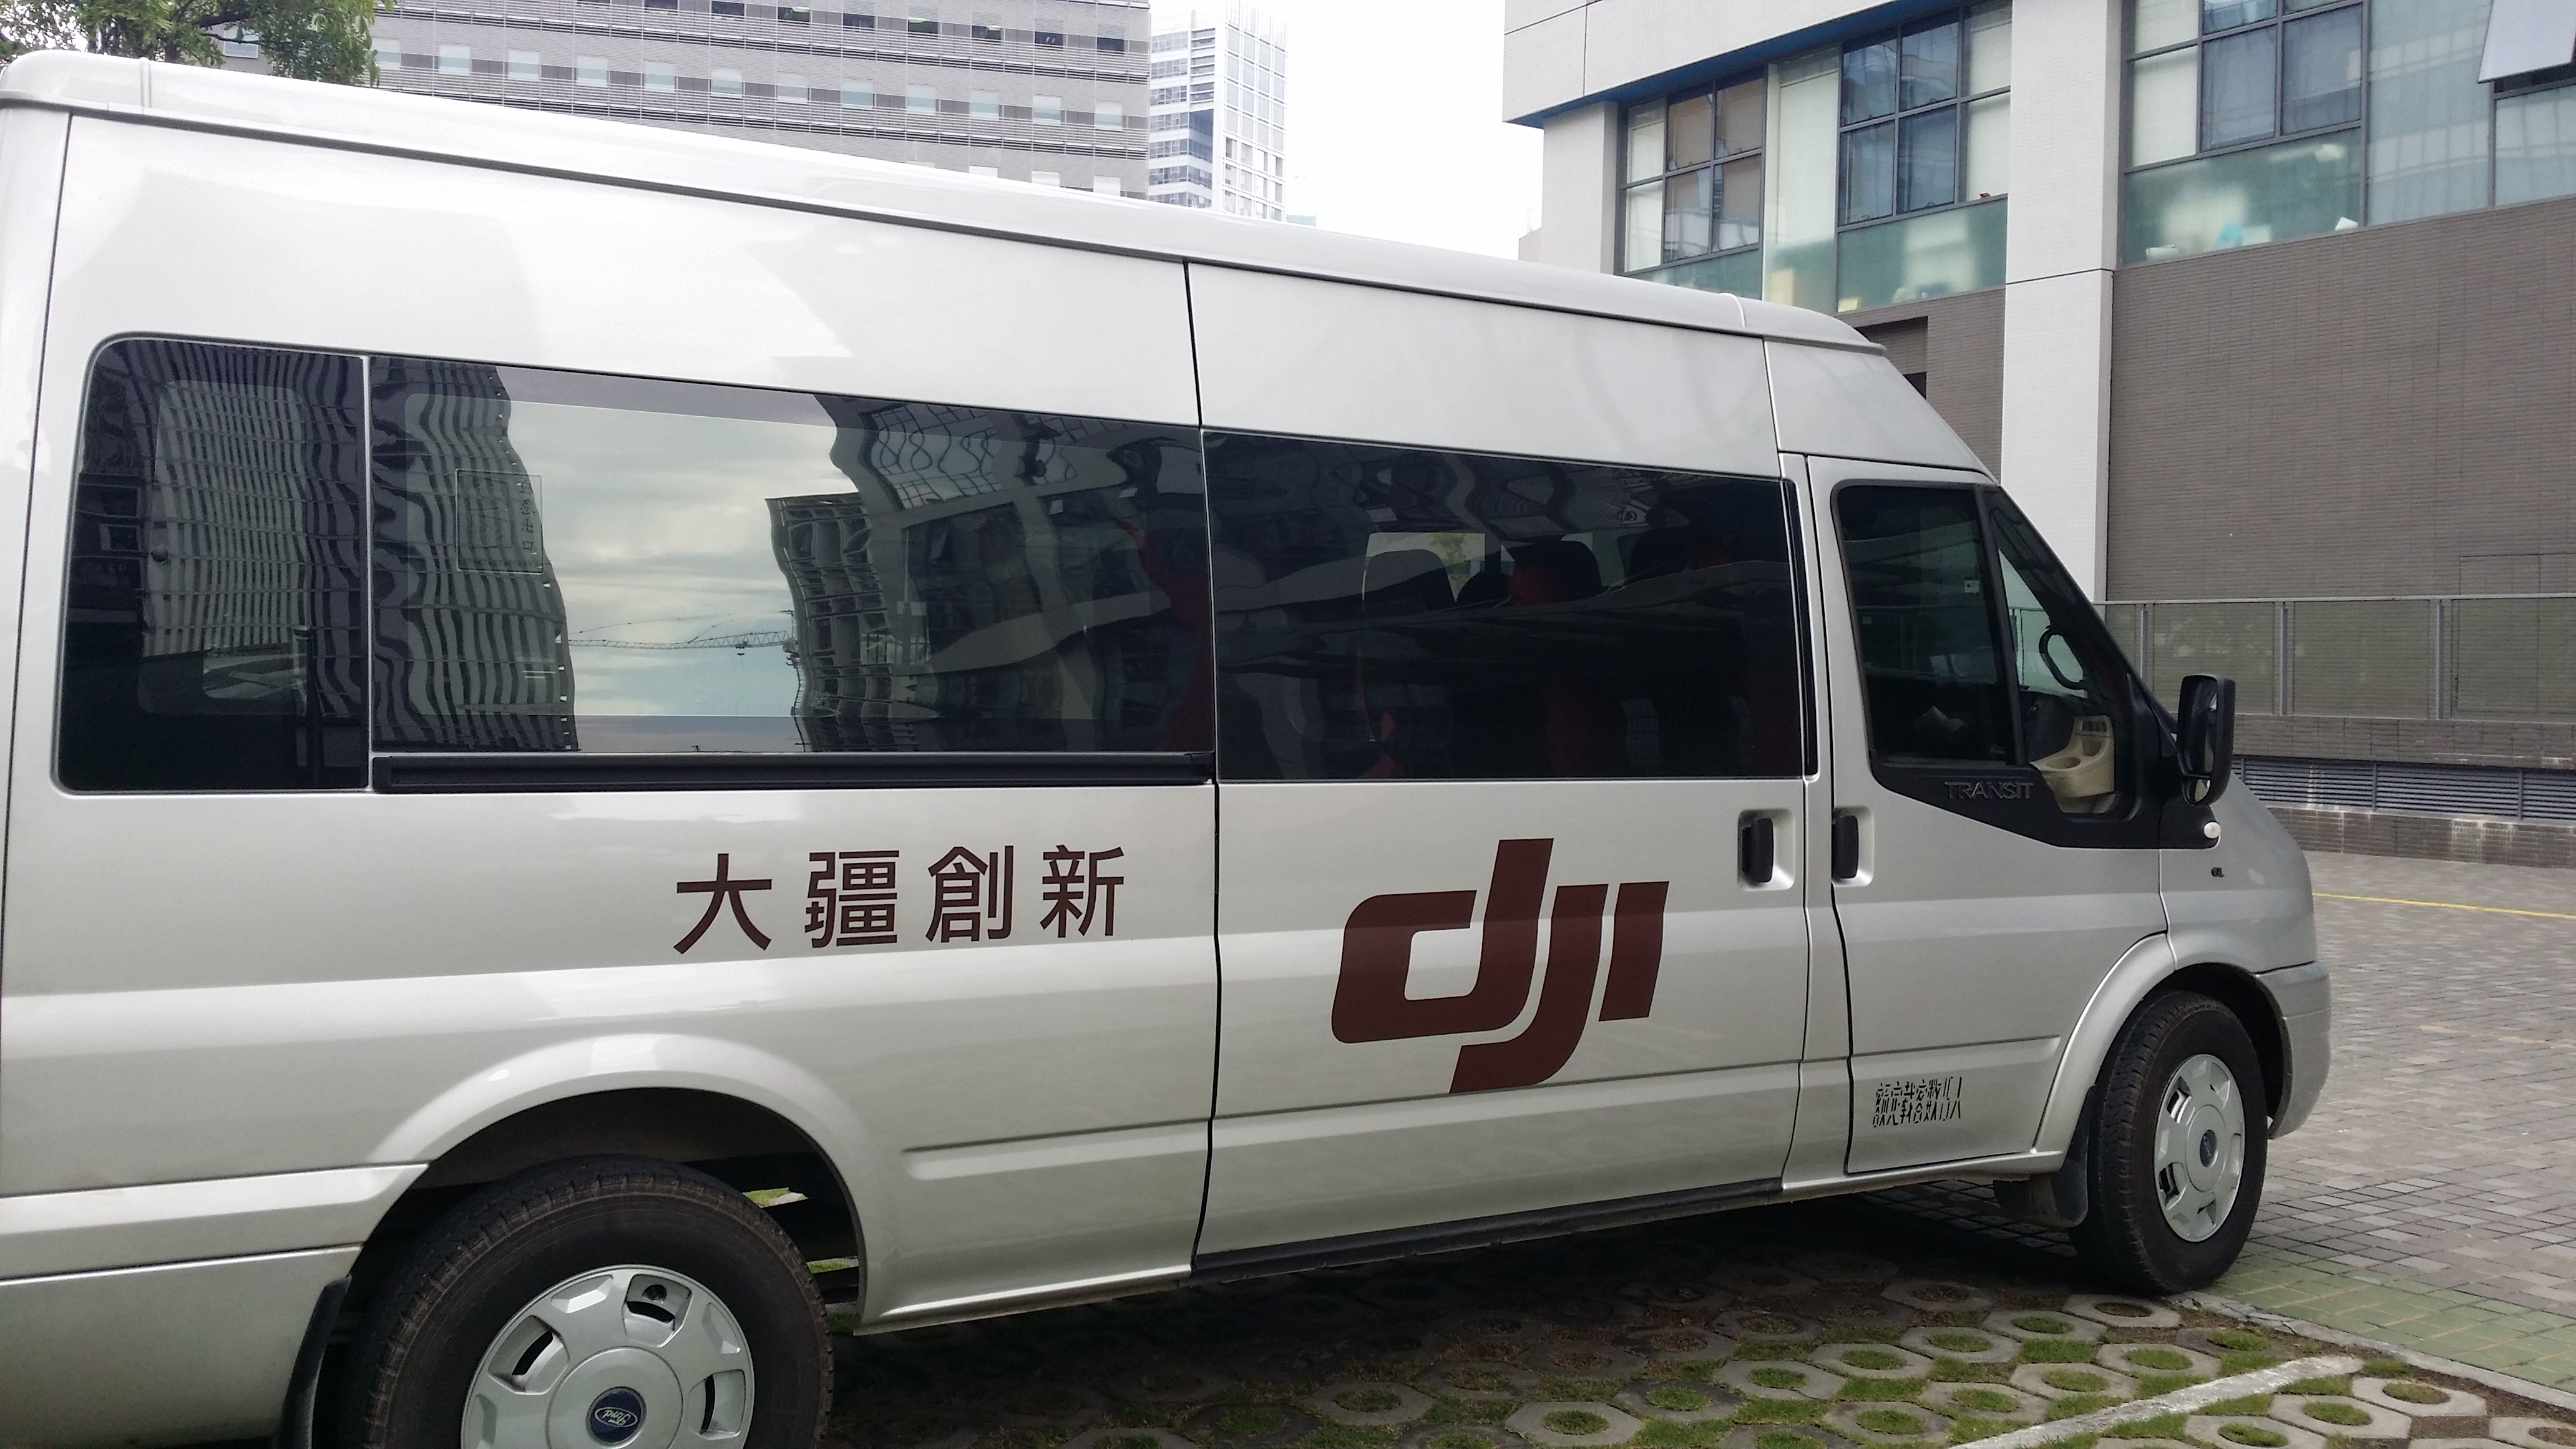 DJI staff minibus which took us to the factory in Baoan each day.